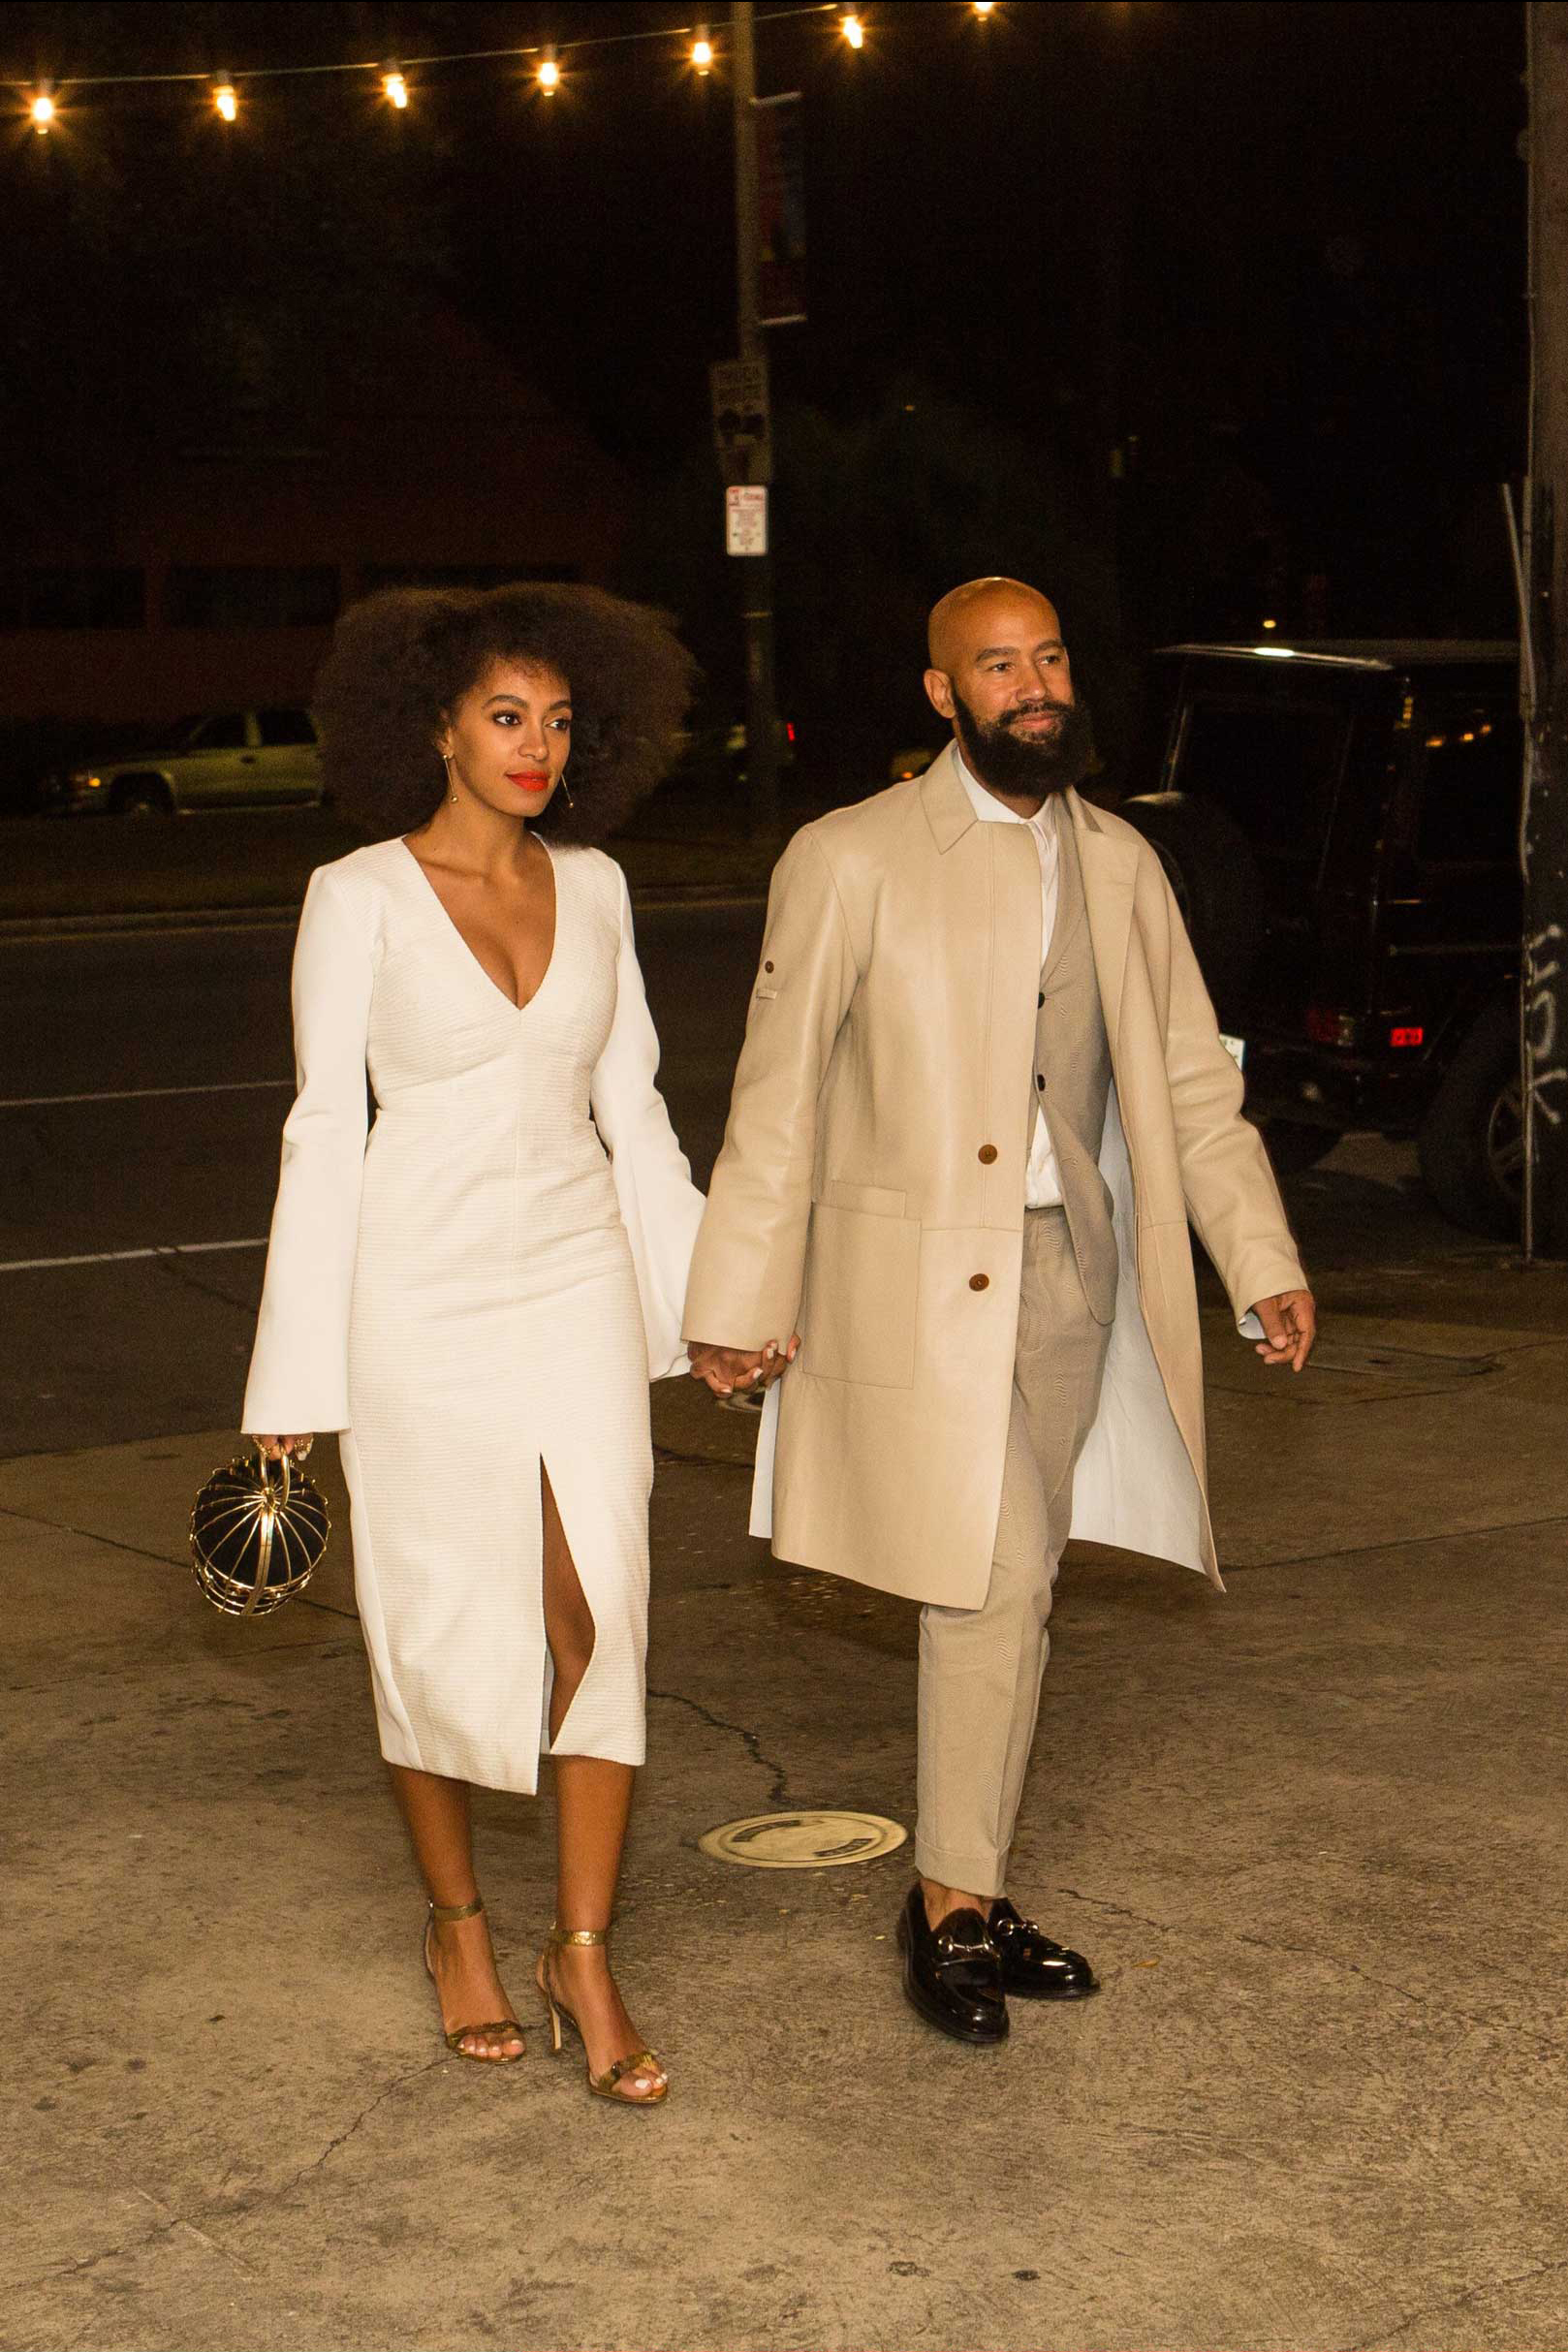 Musician Solange Knowles (L) and her fiancee, music video director Alan Ferguson, are seen outside the Indywood Cinema in New Orleans on Nov. 14, 2014.